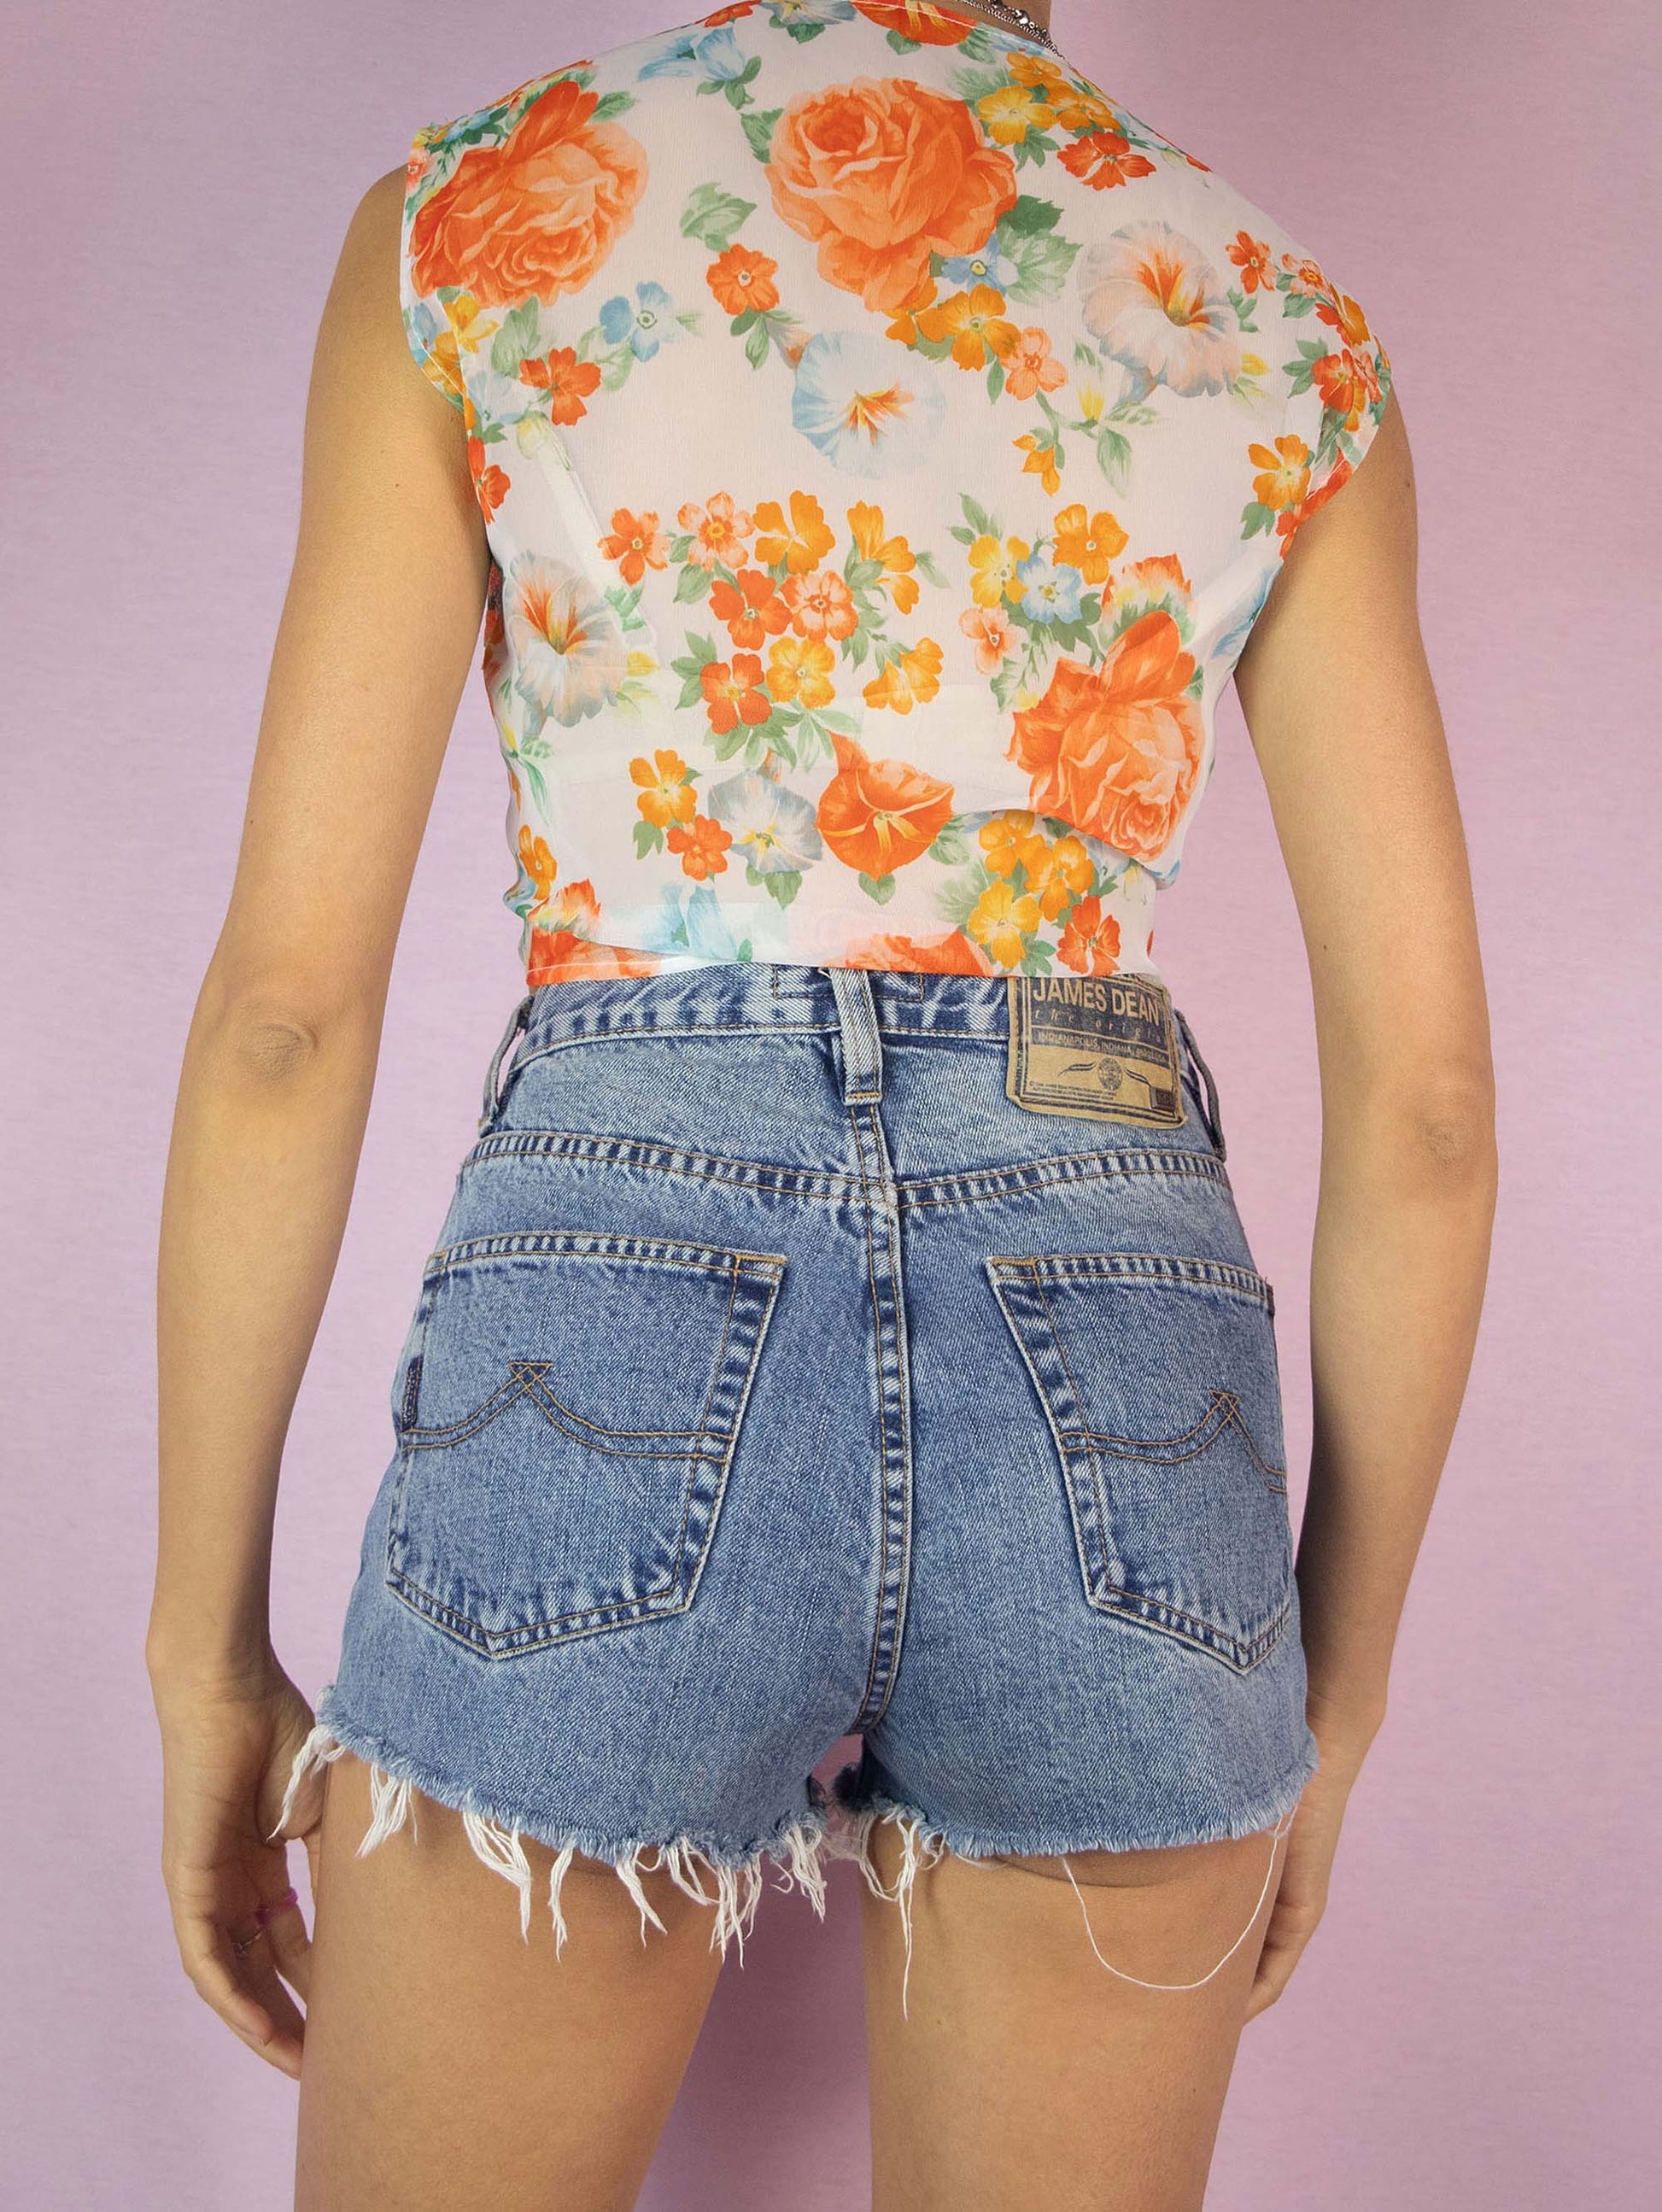 Vintage 90s Sheer Tie Front Crop Top is a romantic summer beach sleeveless blouse, semi-transparent with a multicolored floral print.